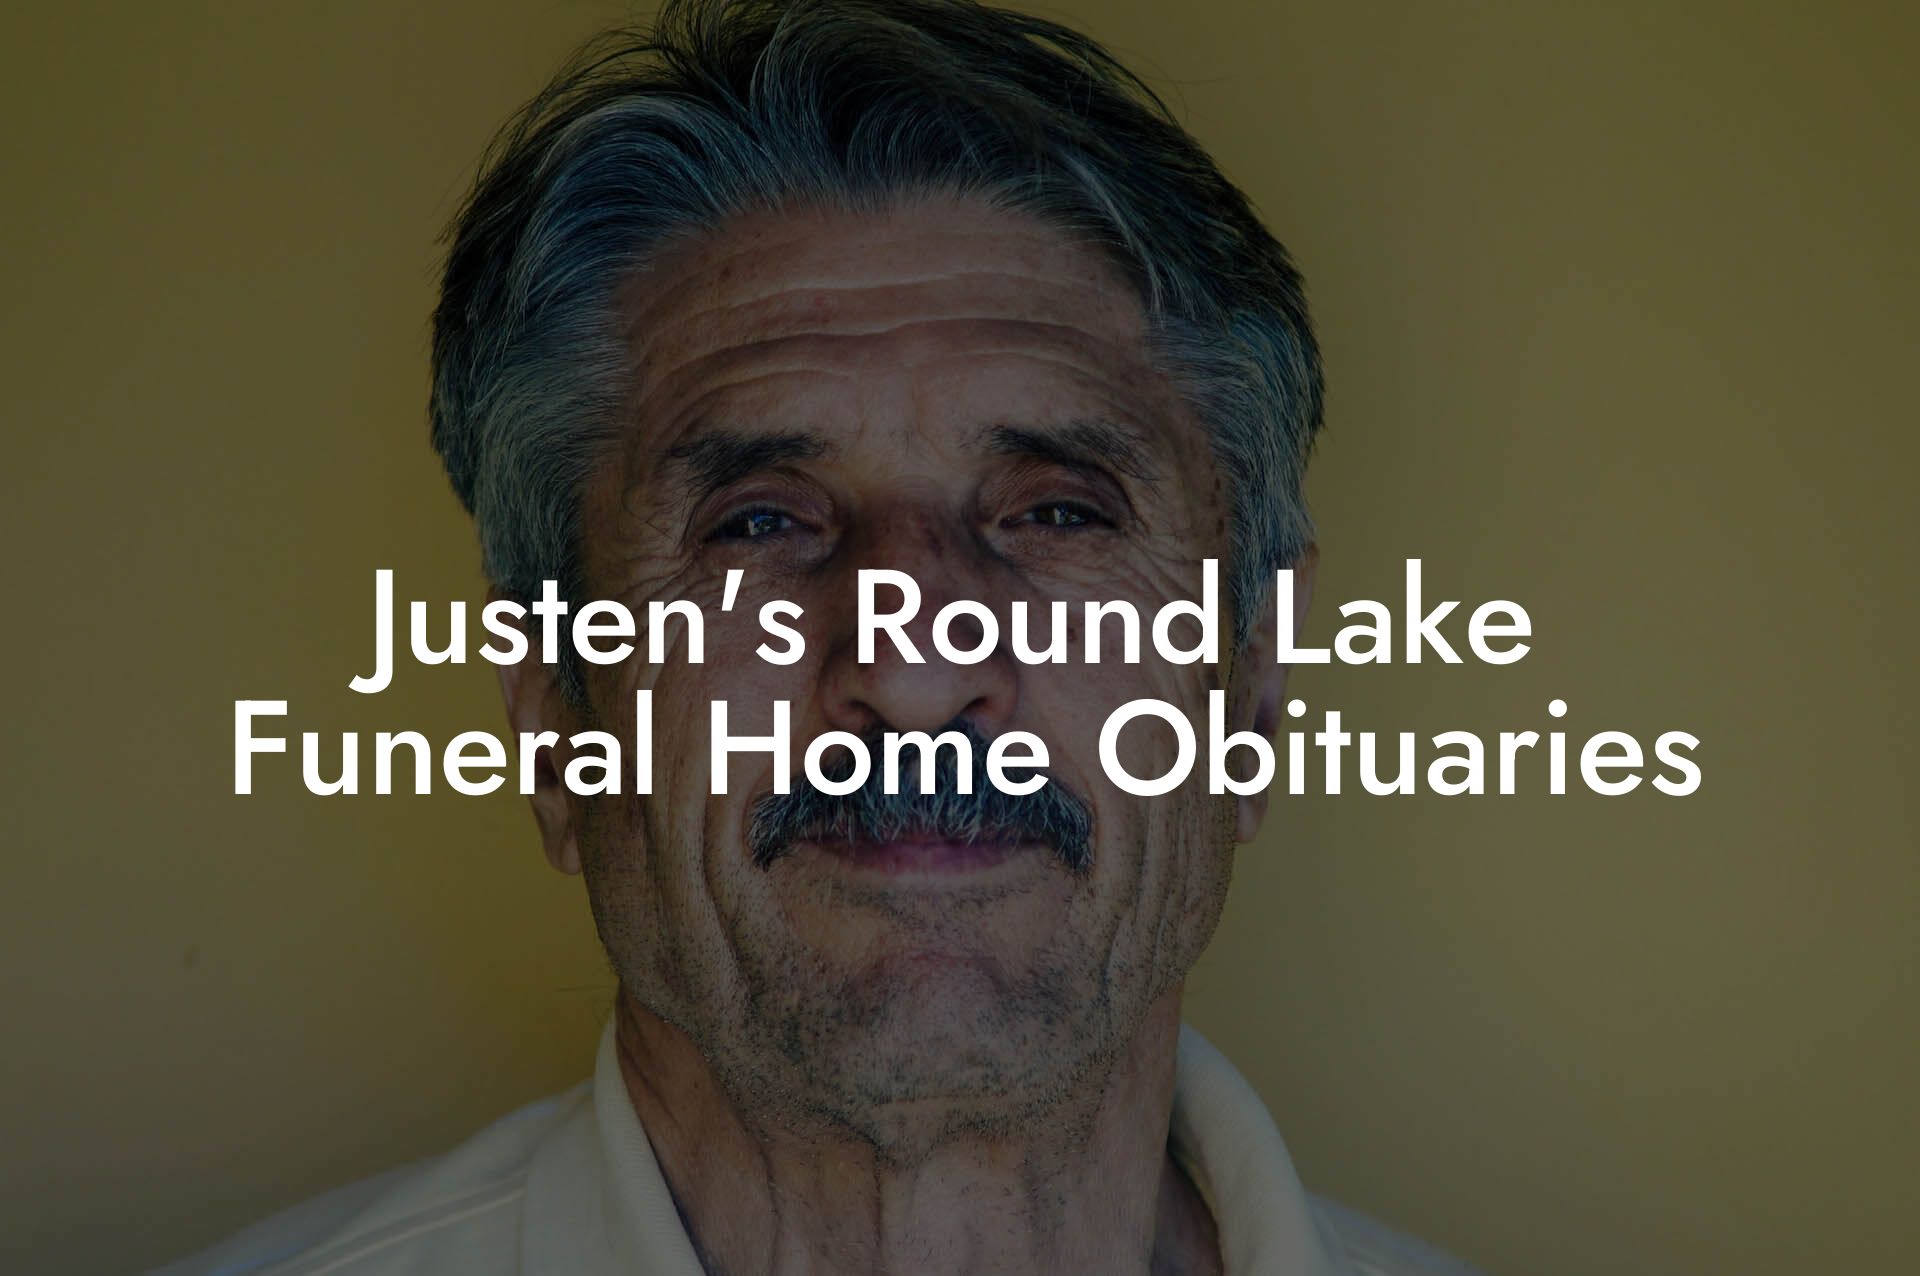 Justen's Round Lake Funeral Home Obituaries